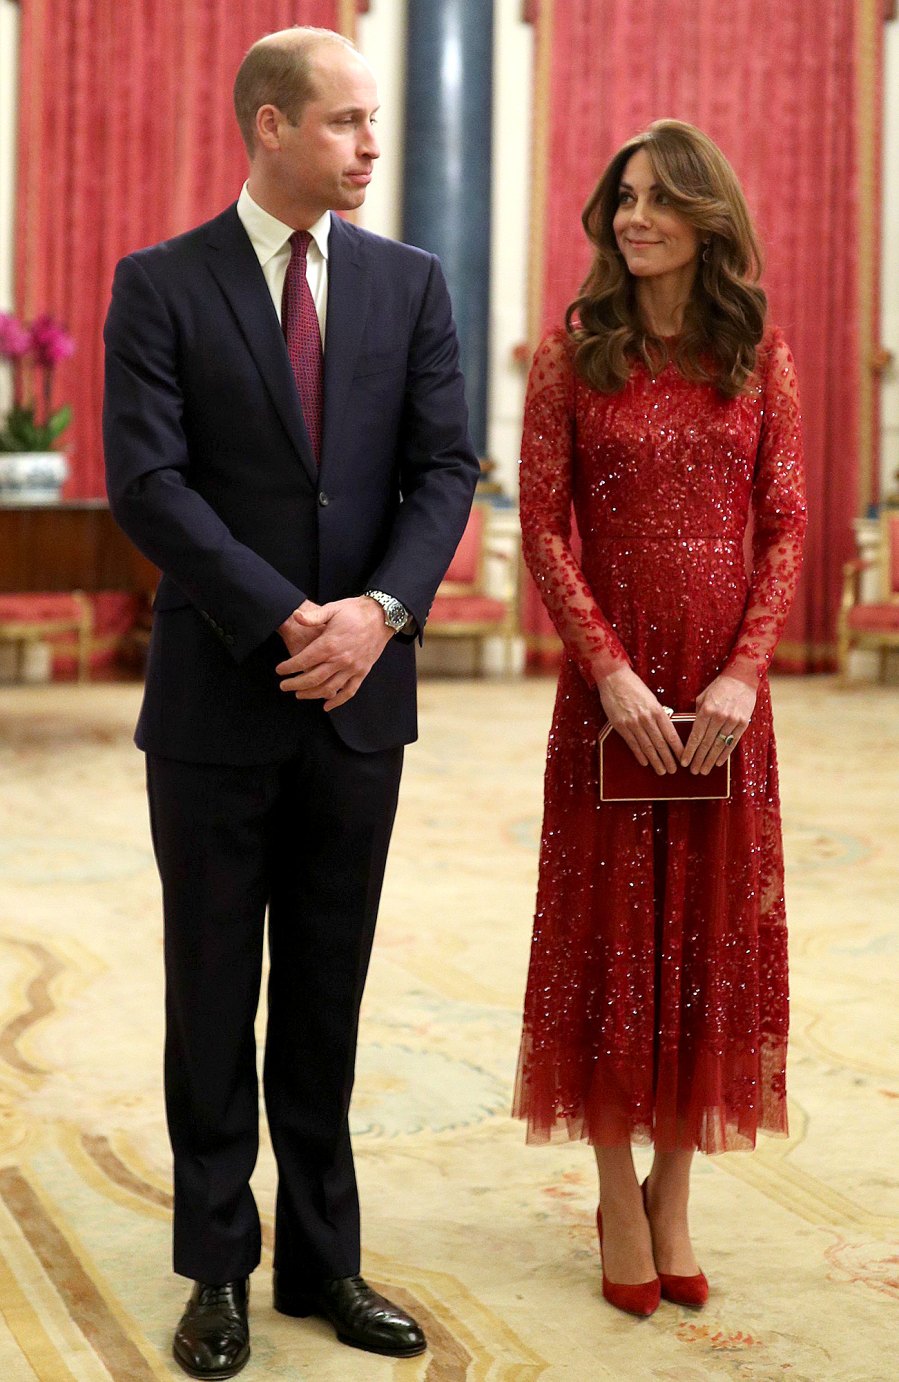 Prince William, Duchess Kate Smile at Buckingham Palace Event